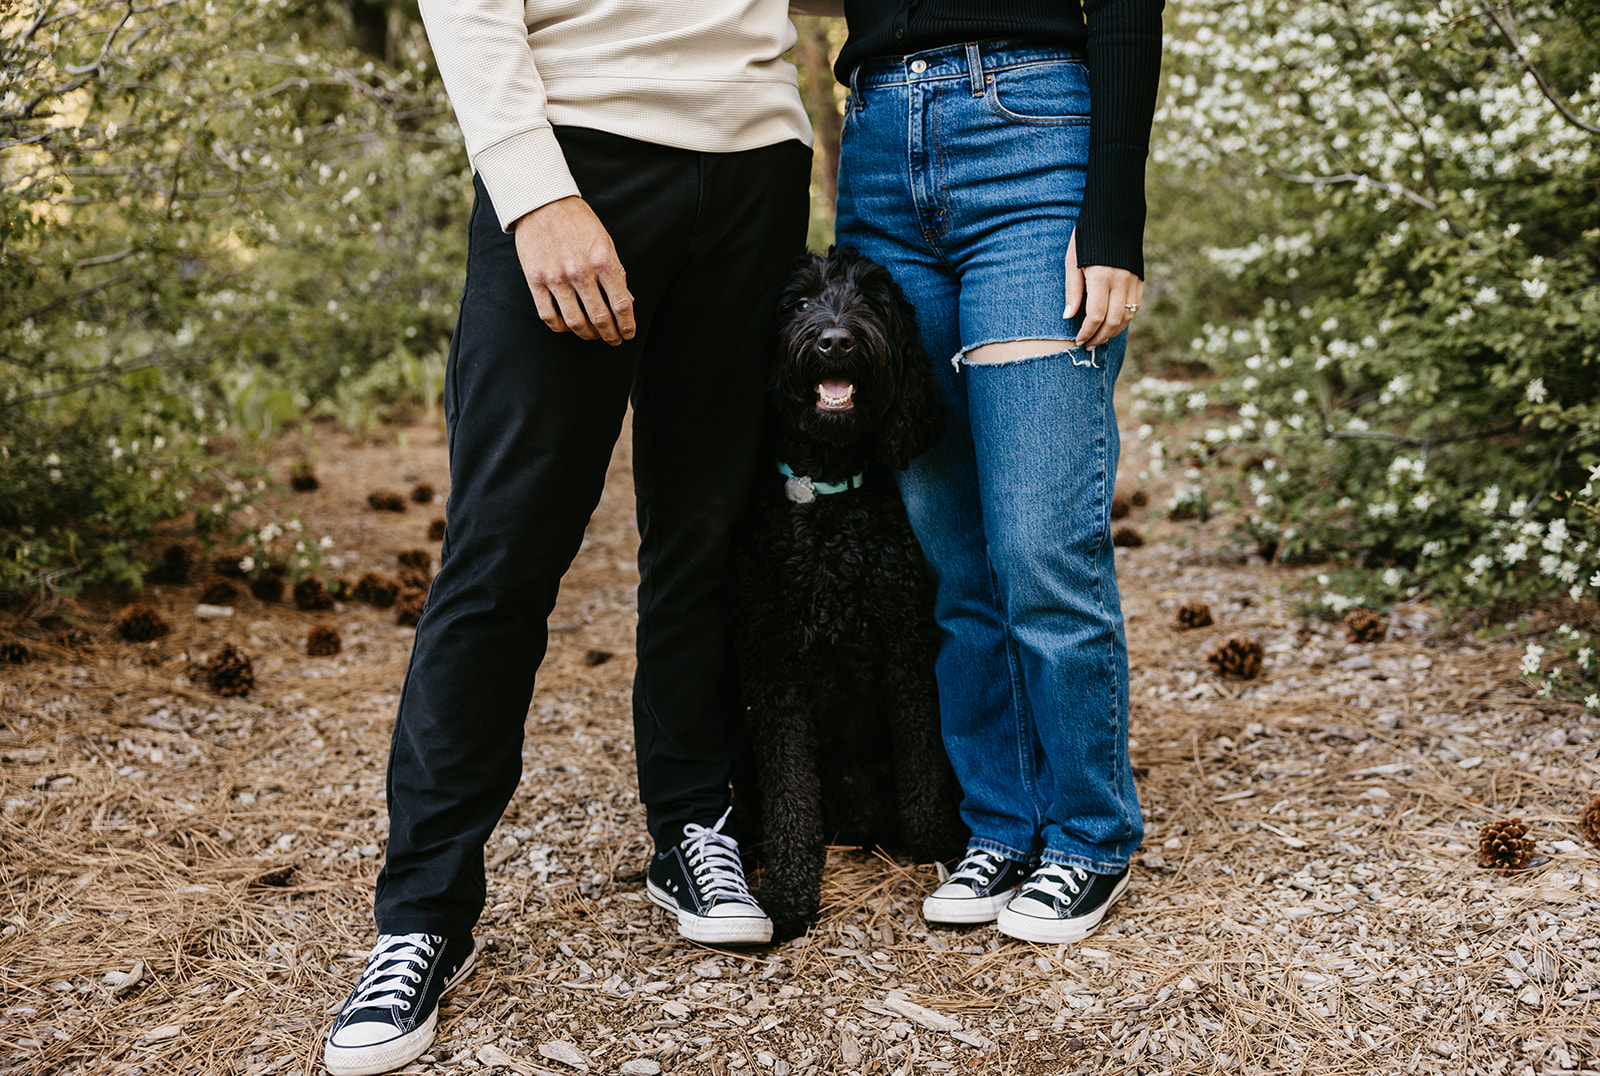 Dani Rawson Photography, a Tahoe-based Engagement Photographer, shares summer engagement session in North Lake tahoe